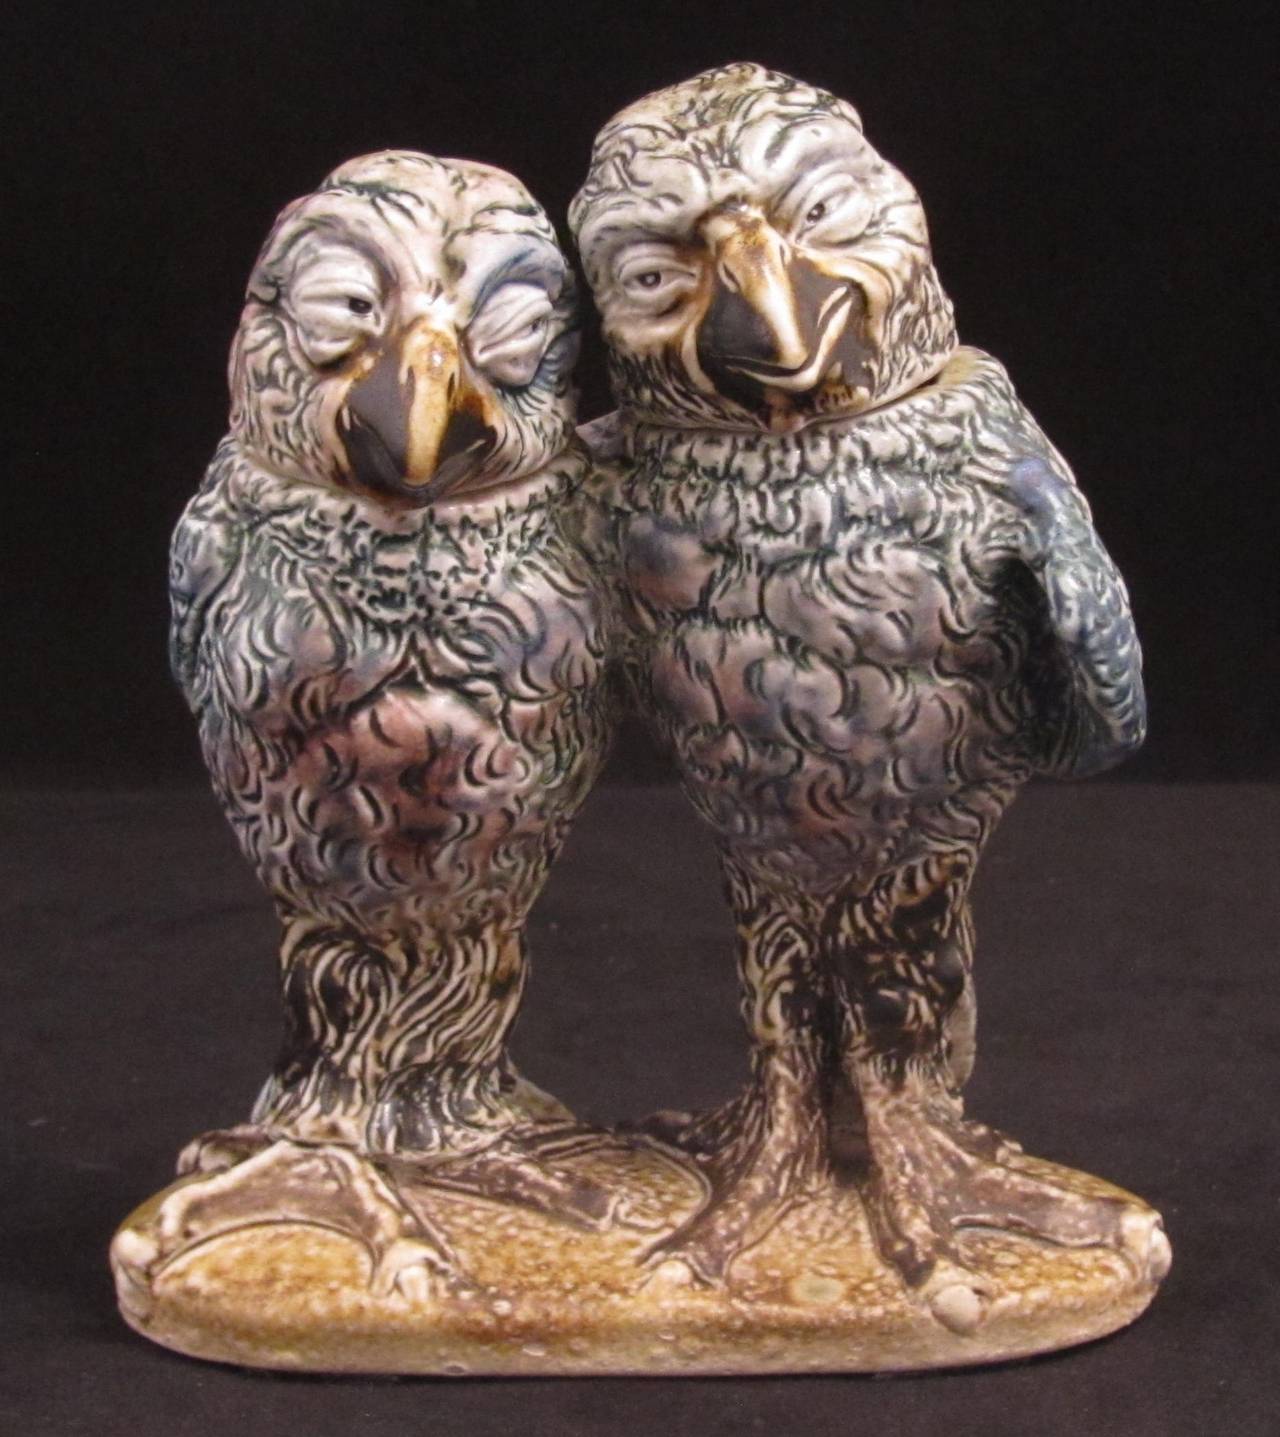 Rare Martin Brothers Double Bird Group. Tobacco jar with detachable heads modelled as two Grotesque Birds in an Embrace. Glaze pops. Undated